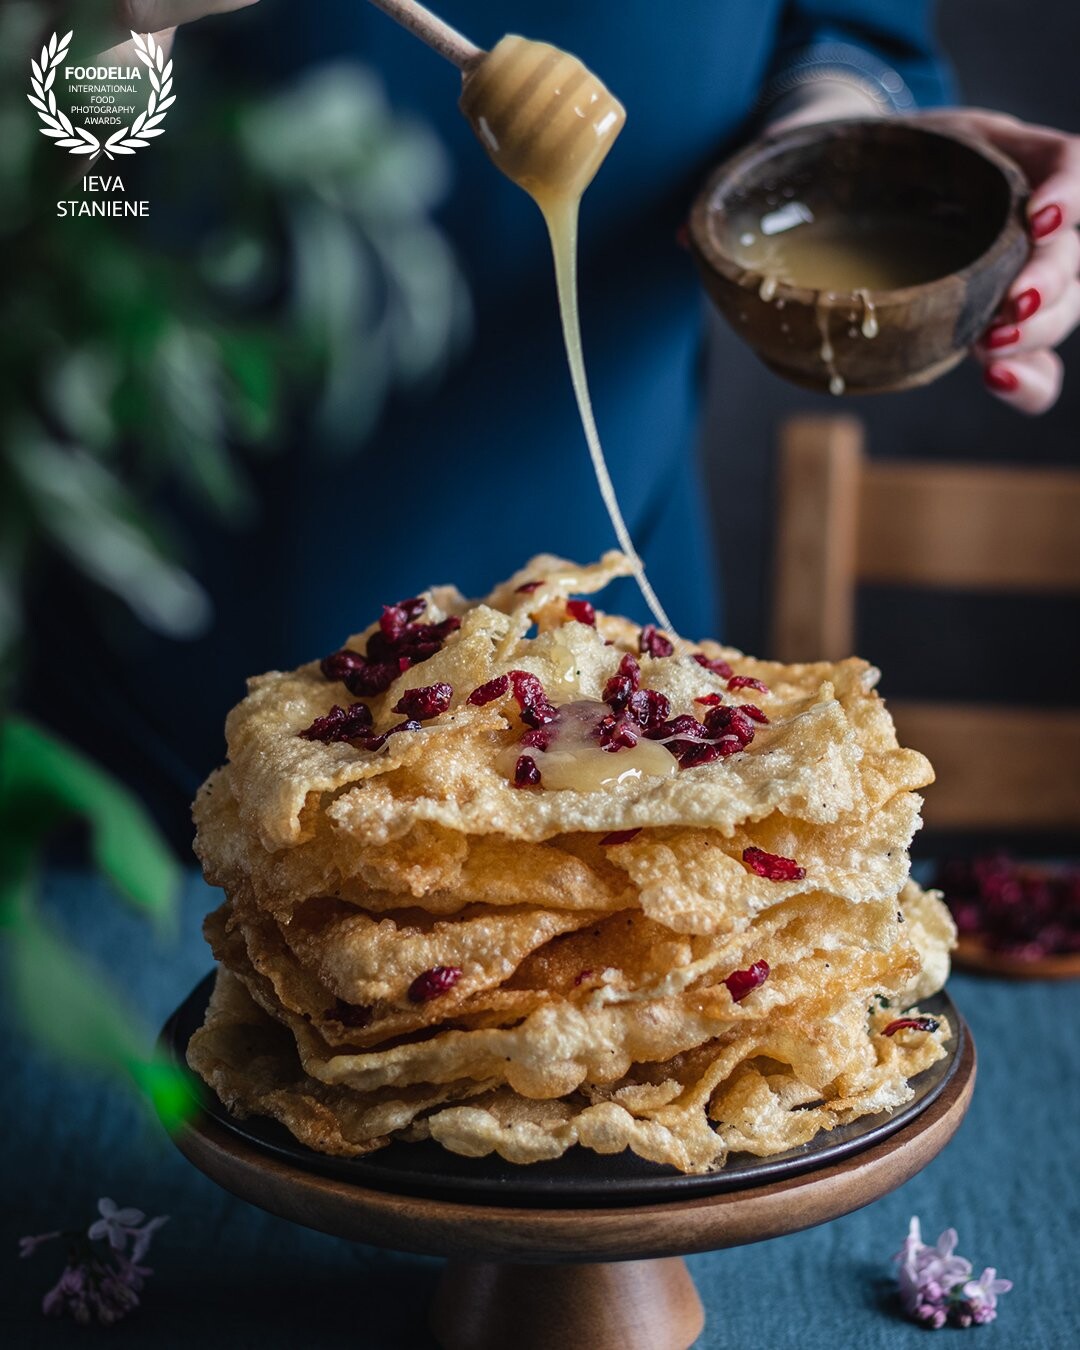 A photo for a client of a traditional Lithuanian dessert, called anthill cake. I decided to include essential ingredients of this dessert by pouring honey and using some more cranberries in the shot.